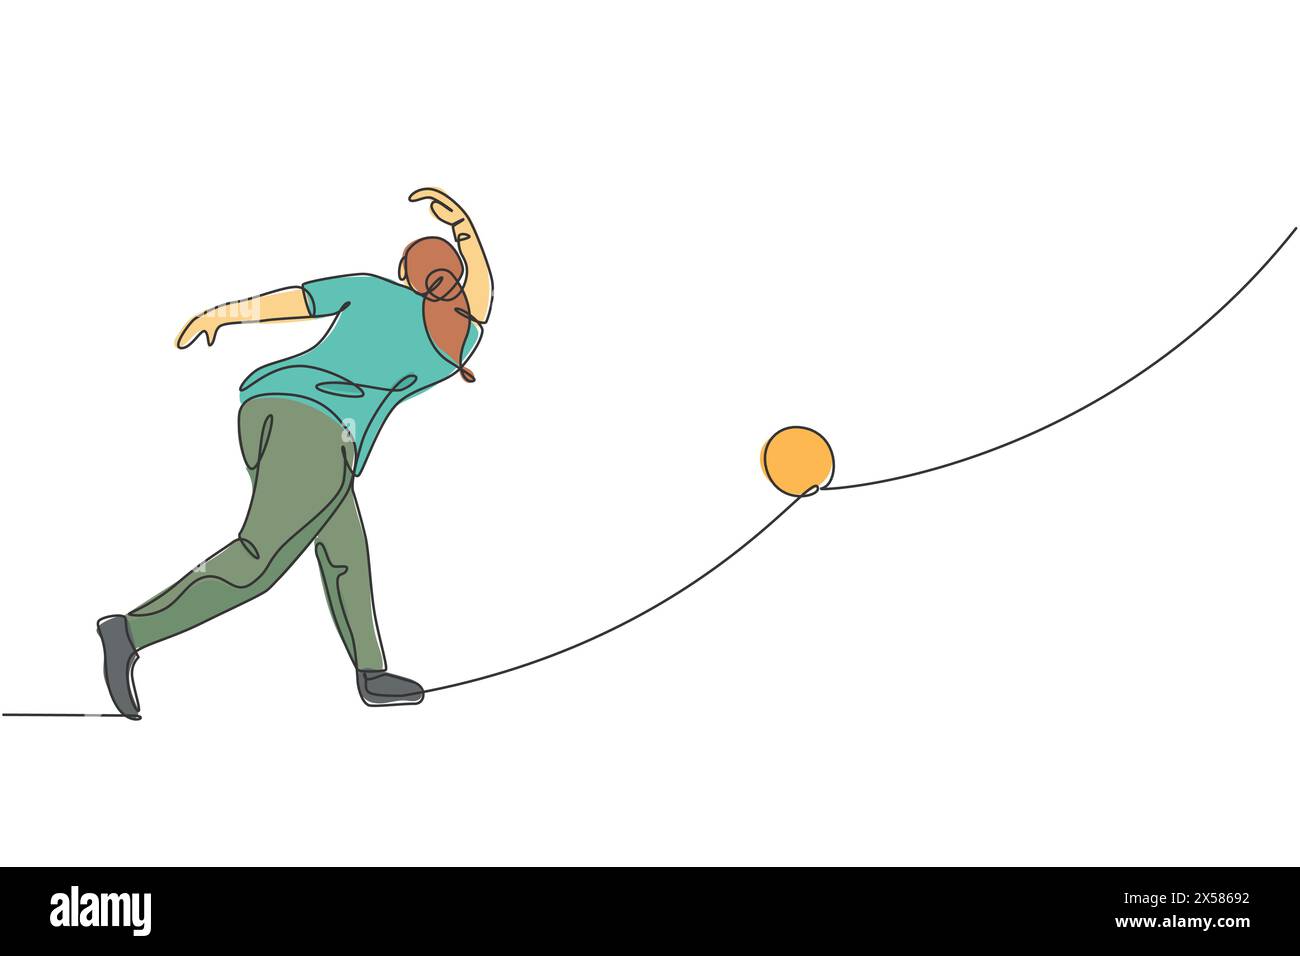 Single continuous line drawing of young happy bowling player man throw bowling ball to hit the pins. Doing sport hobby at leisure time concept. Trendy Stock Vector